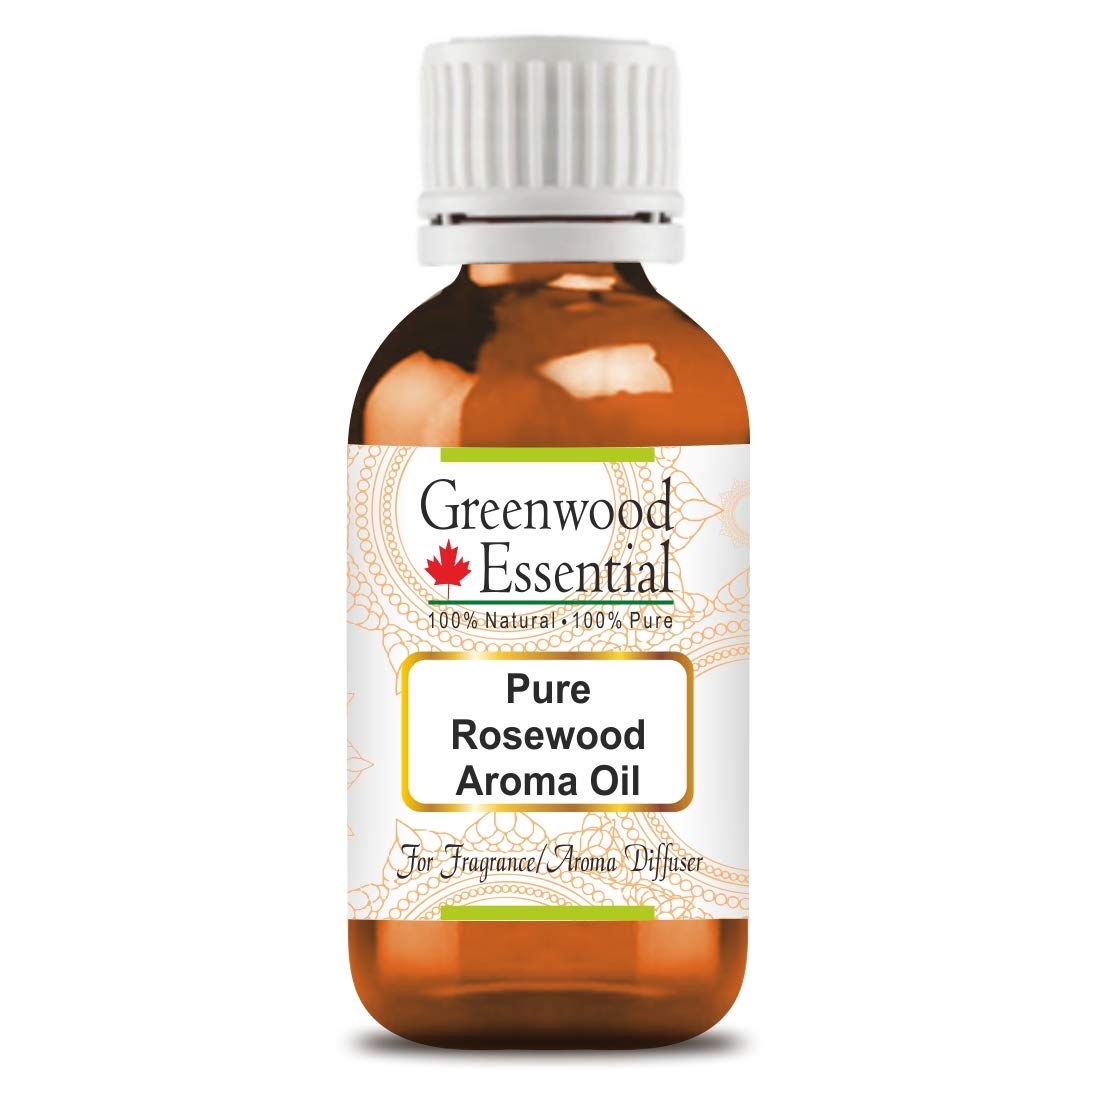 Rosewood Essential Oil - pure and therapeutic quality